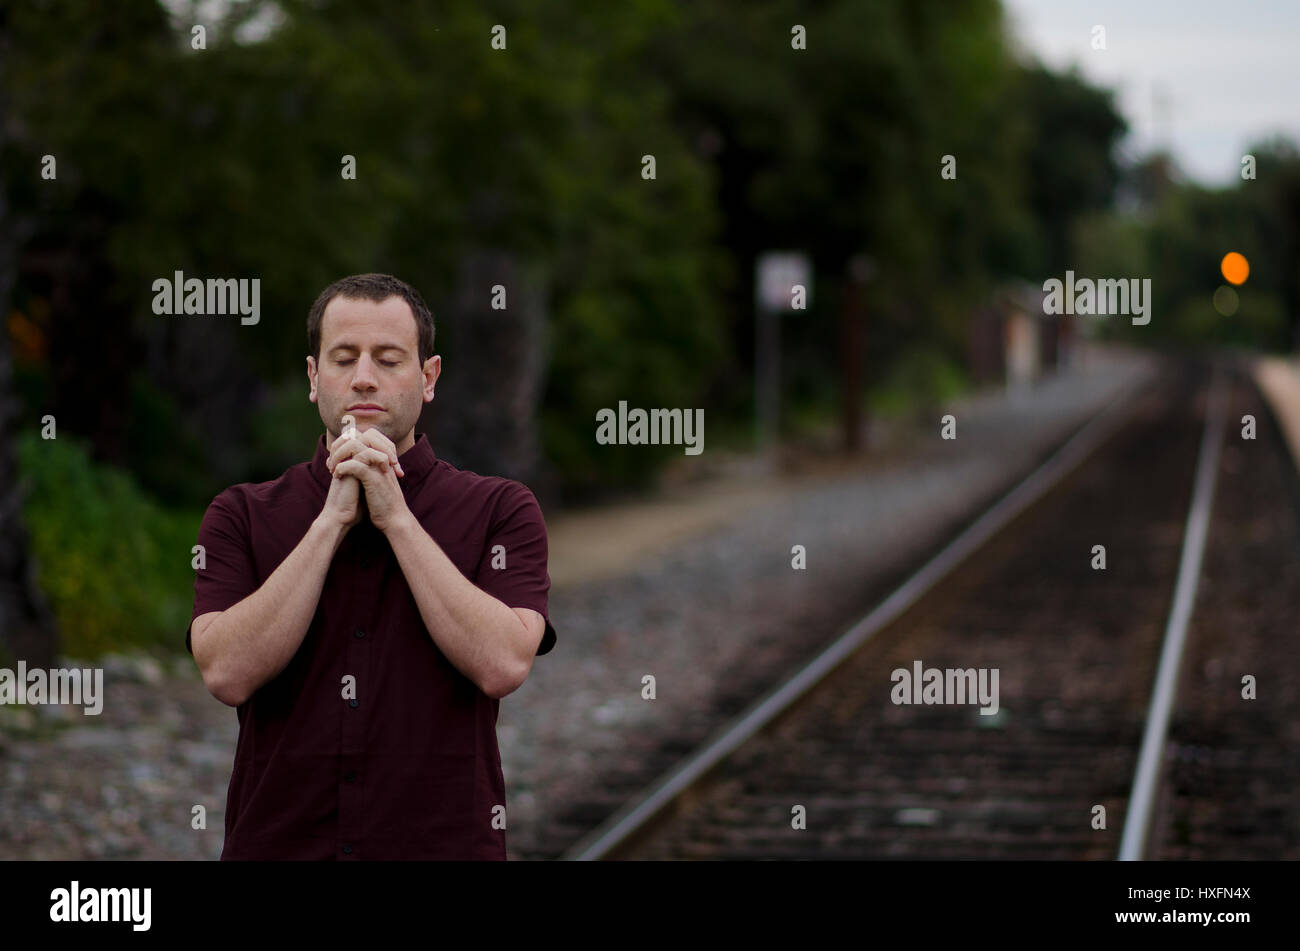 Man praying alone by train tracks with hands clasped together. Stock Photo